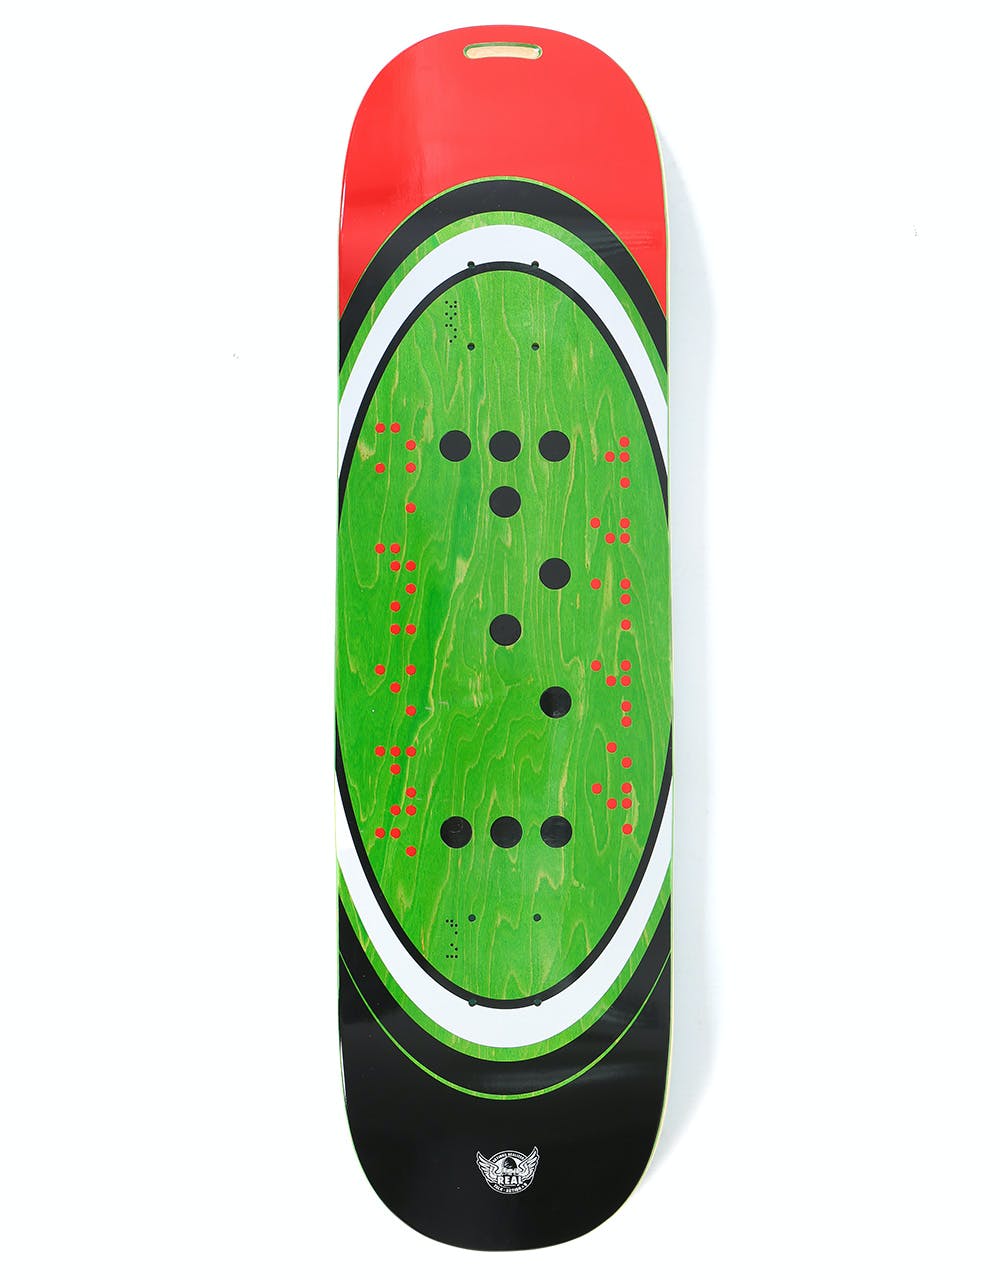 Real Braille Actions Realized Skateboard Deck - 8.5"